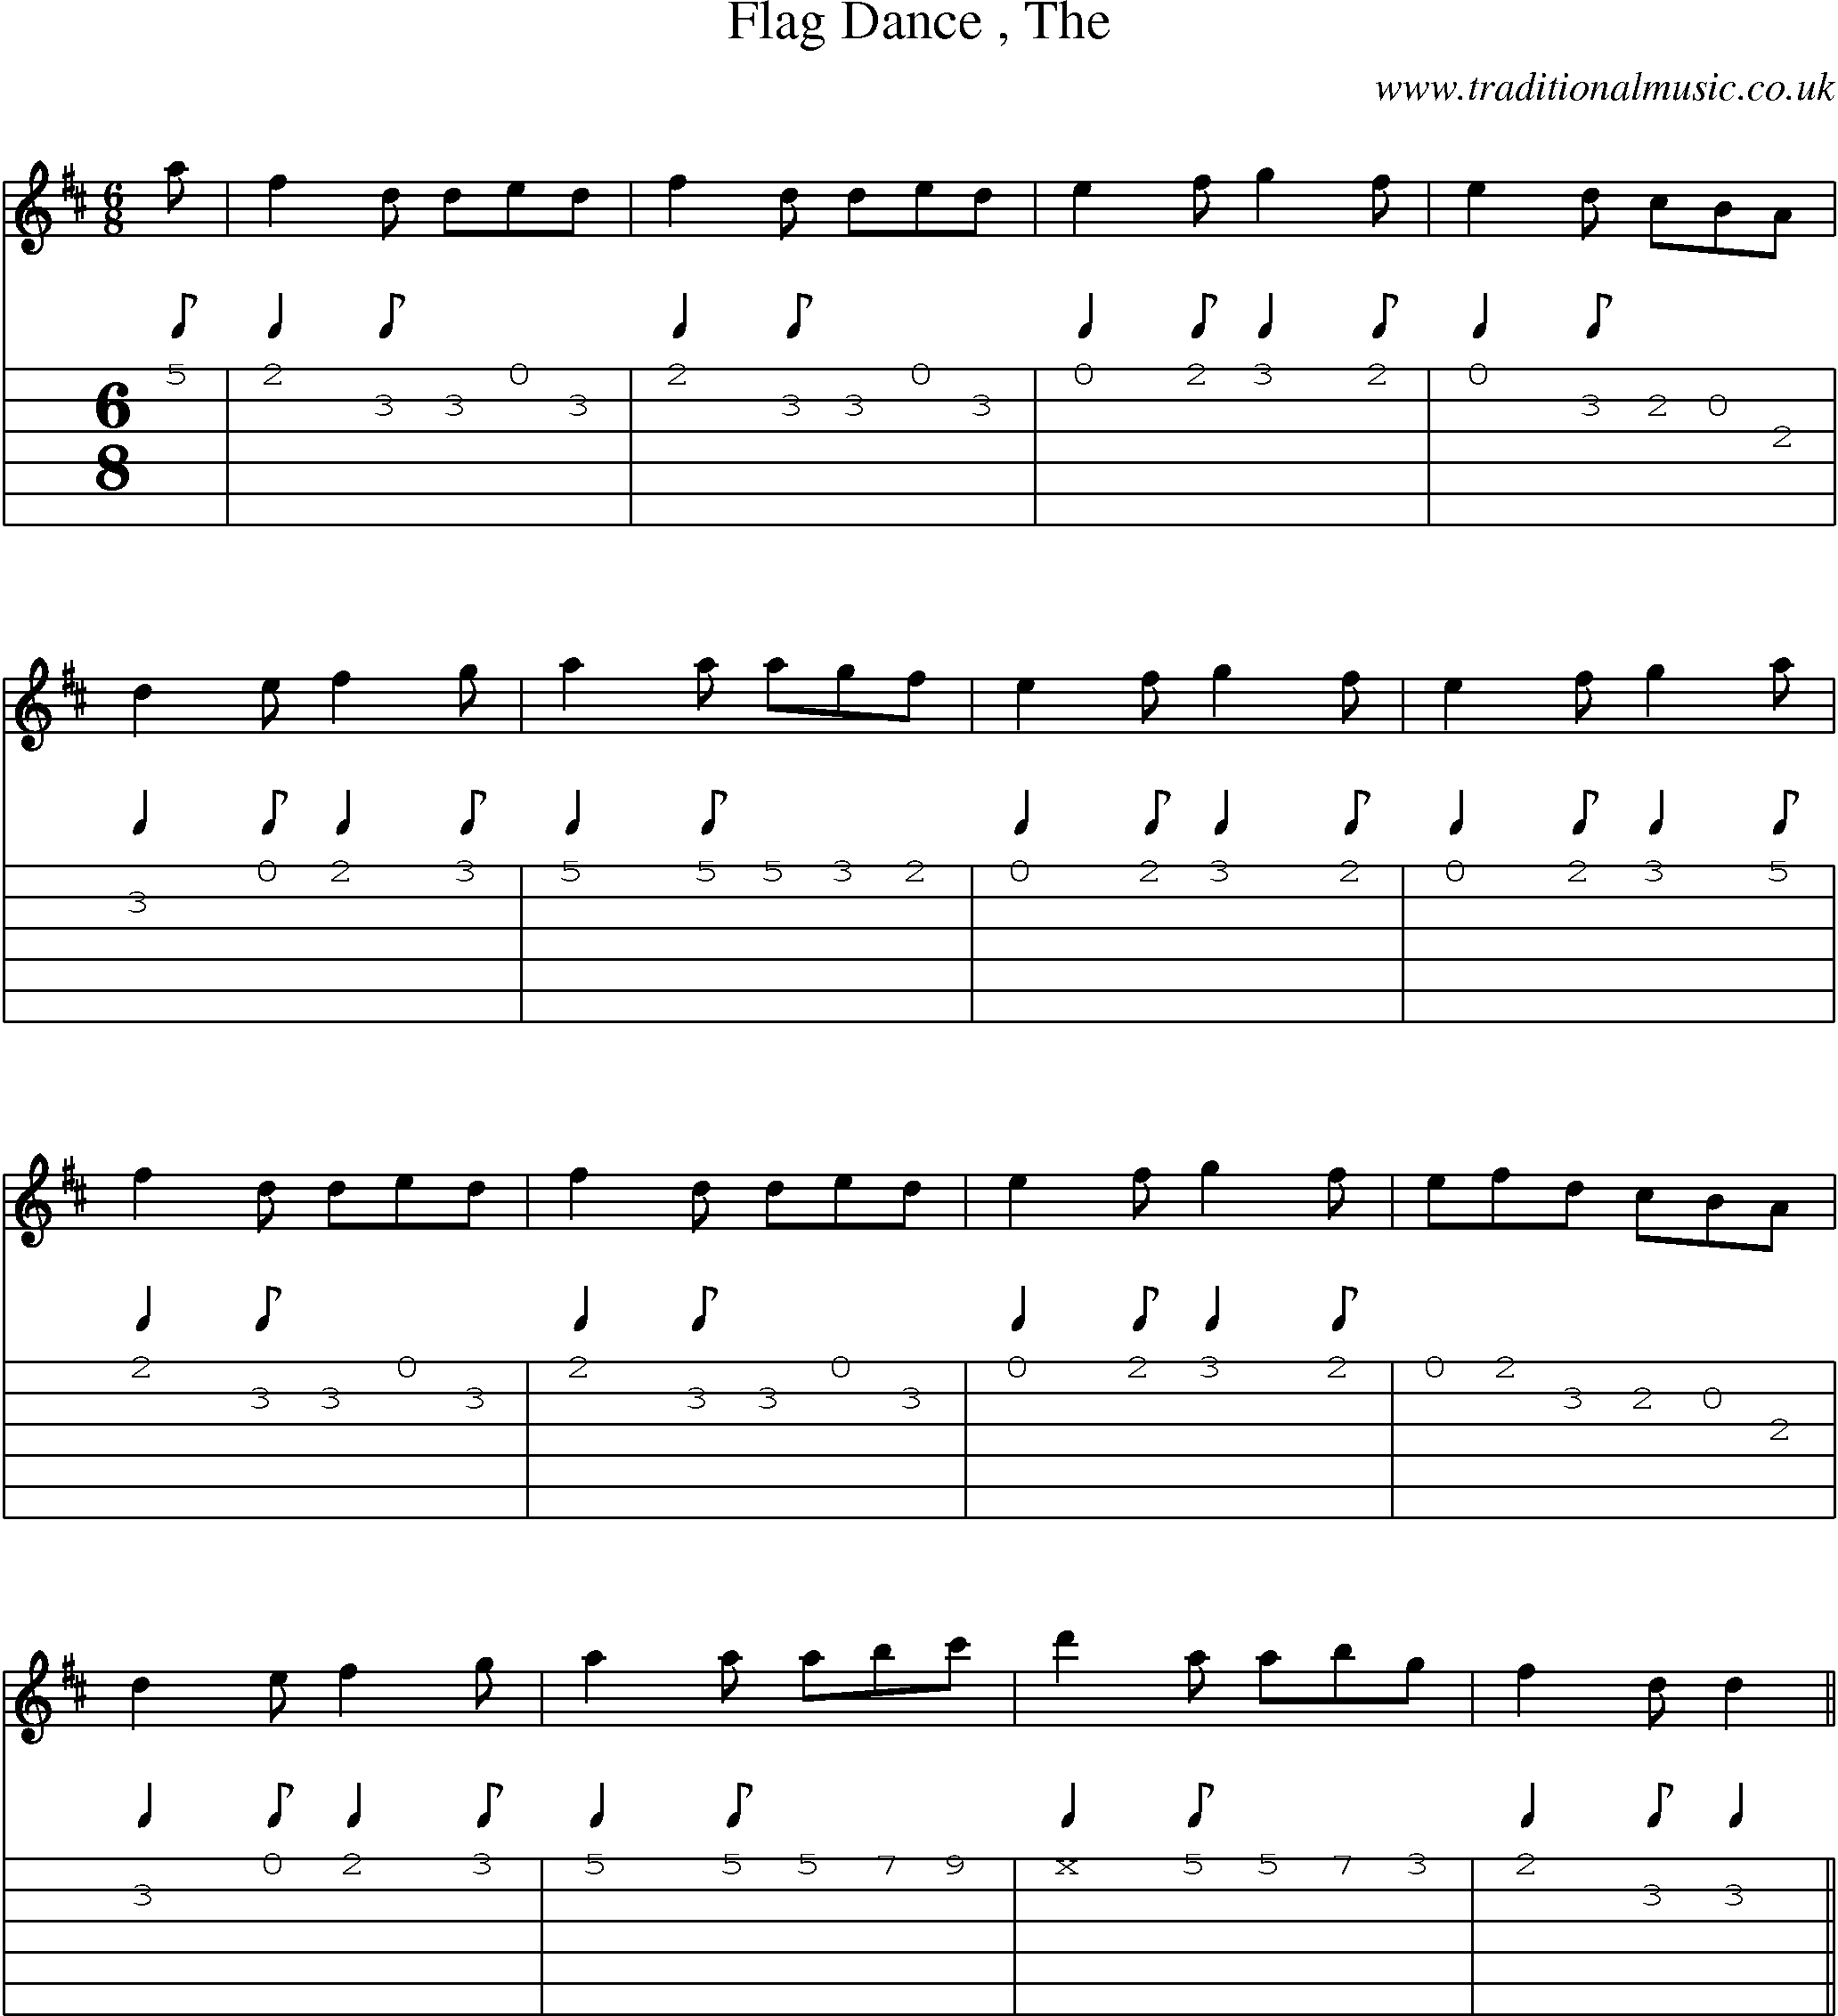 Music Score and Guitar Tabs for Flag Dance